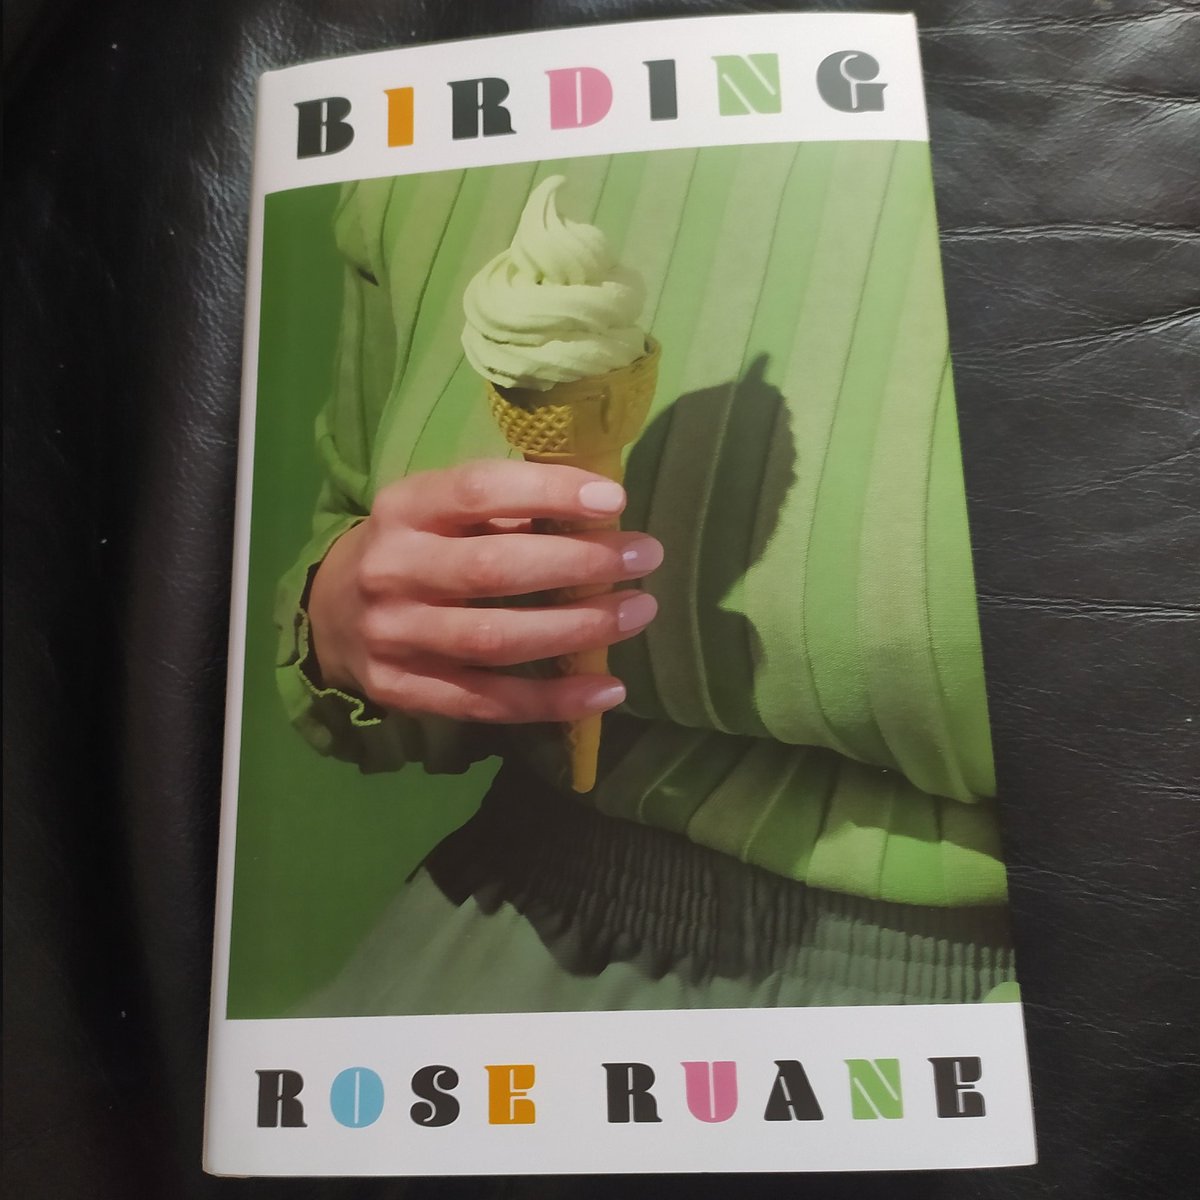 Just finished Birding by @RegretteRuane . What a wonderful book, and so beautifully written. Dealing with complex, and different types of abuse. The characters are just brilliantly crafted. Absolutely loved this, and gets 5* from me. Can't recommend it highly enough.